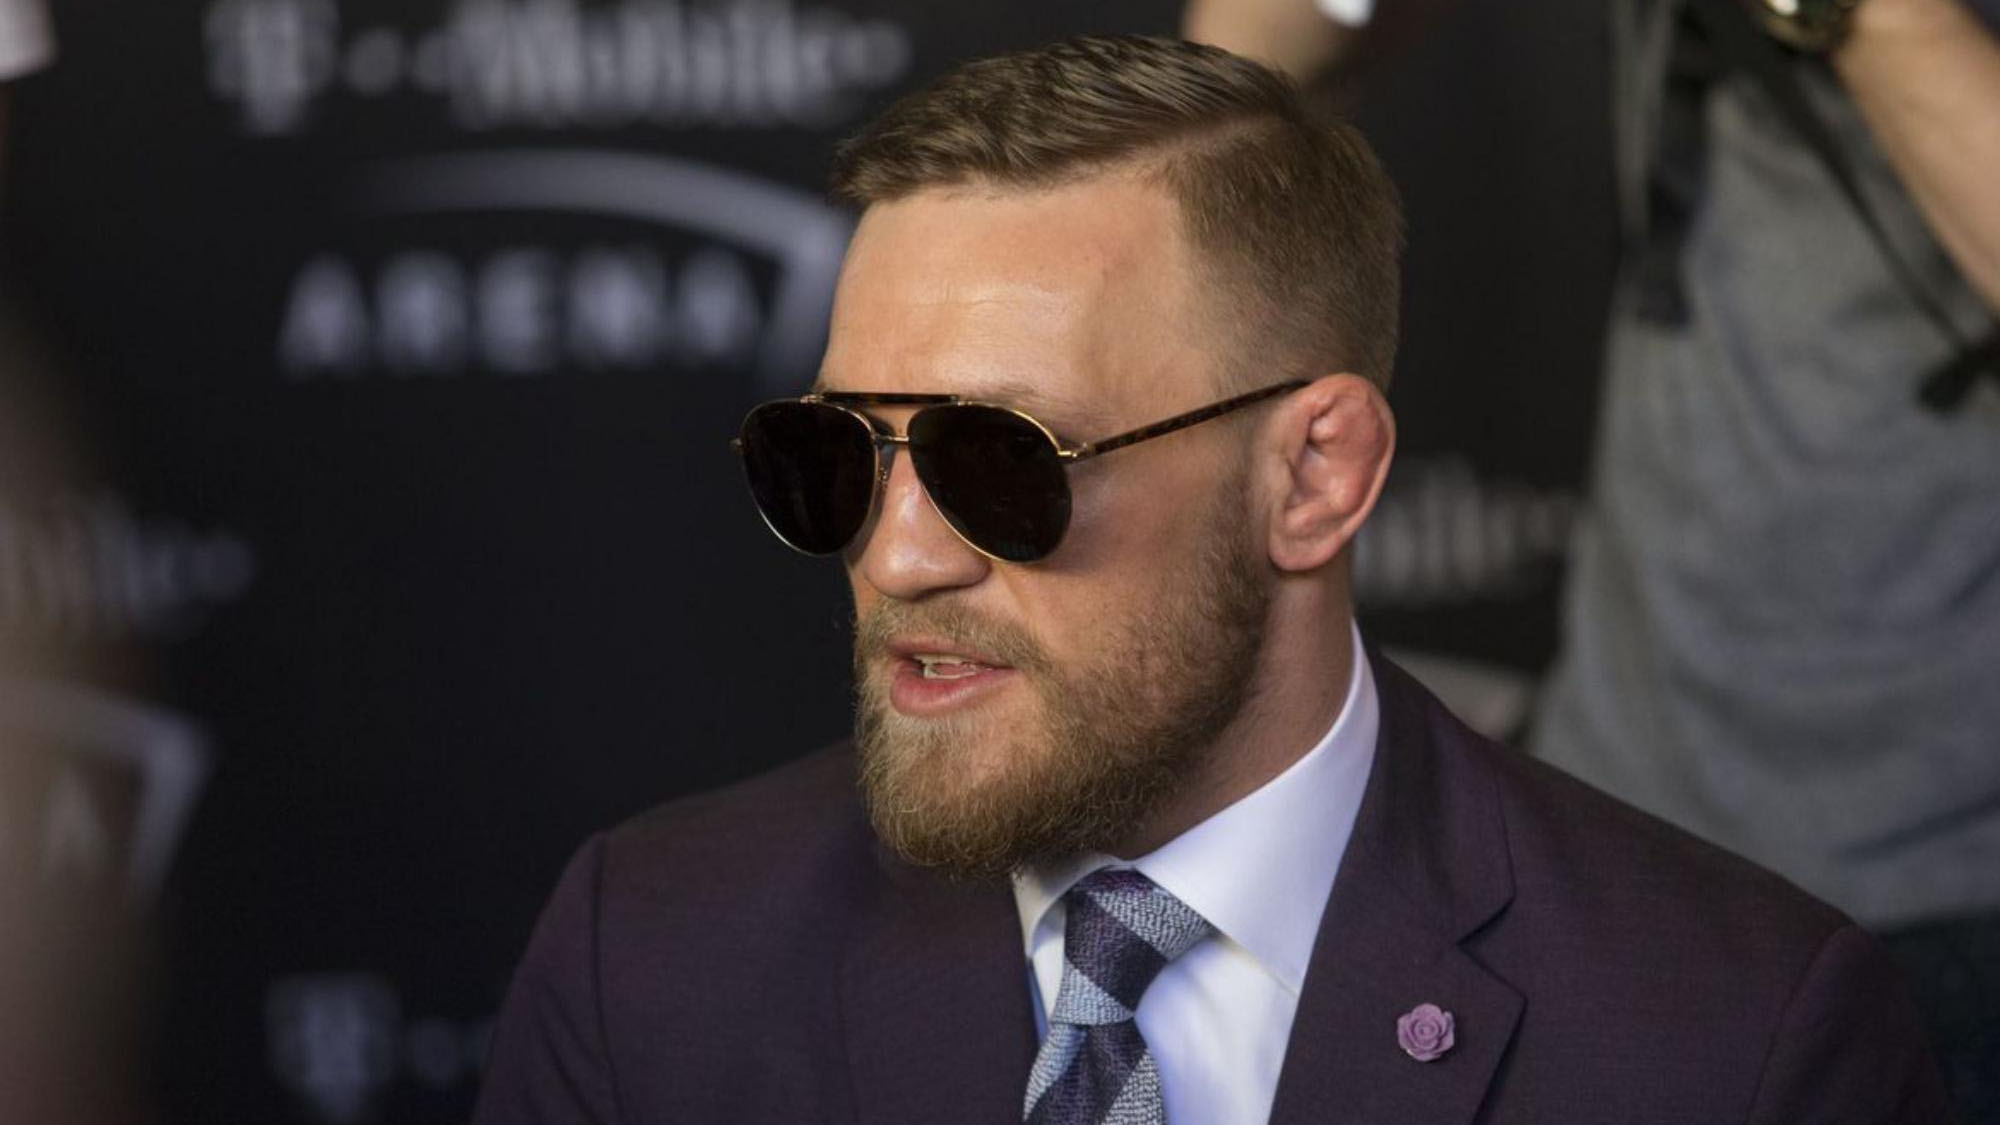 Conor McGregor denies being a racist with racist statement | Salon.com